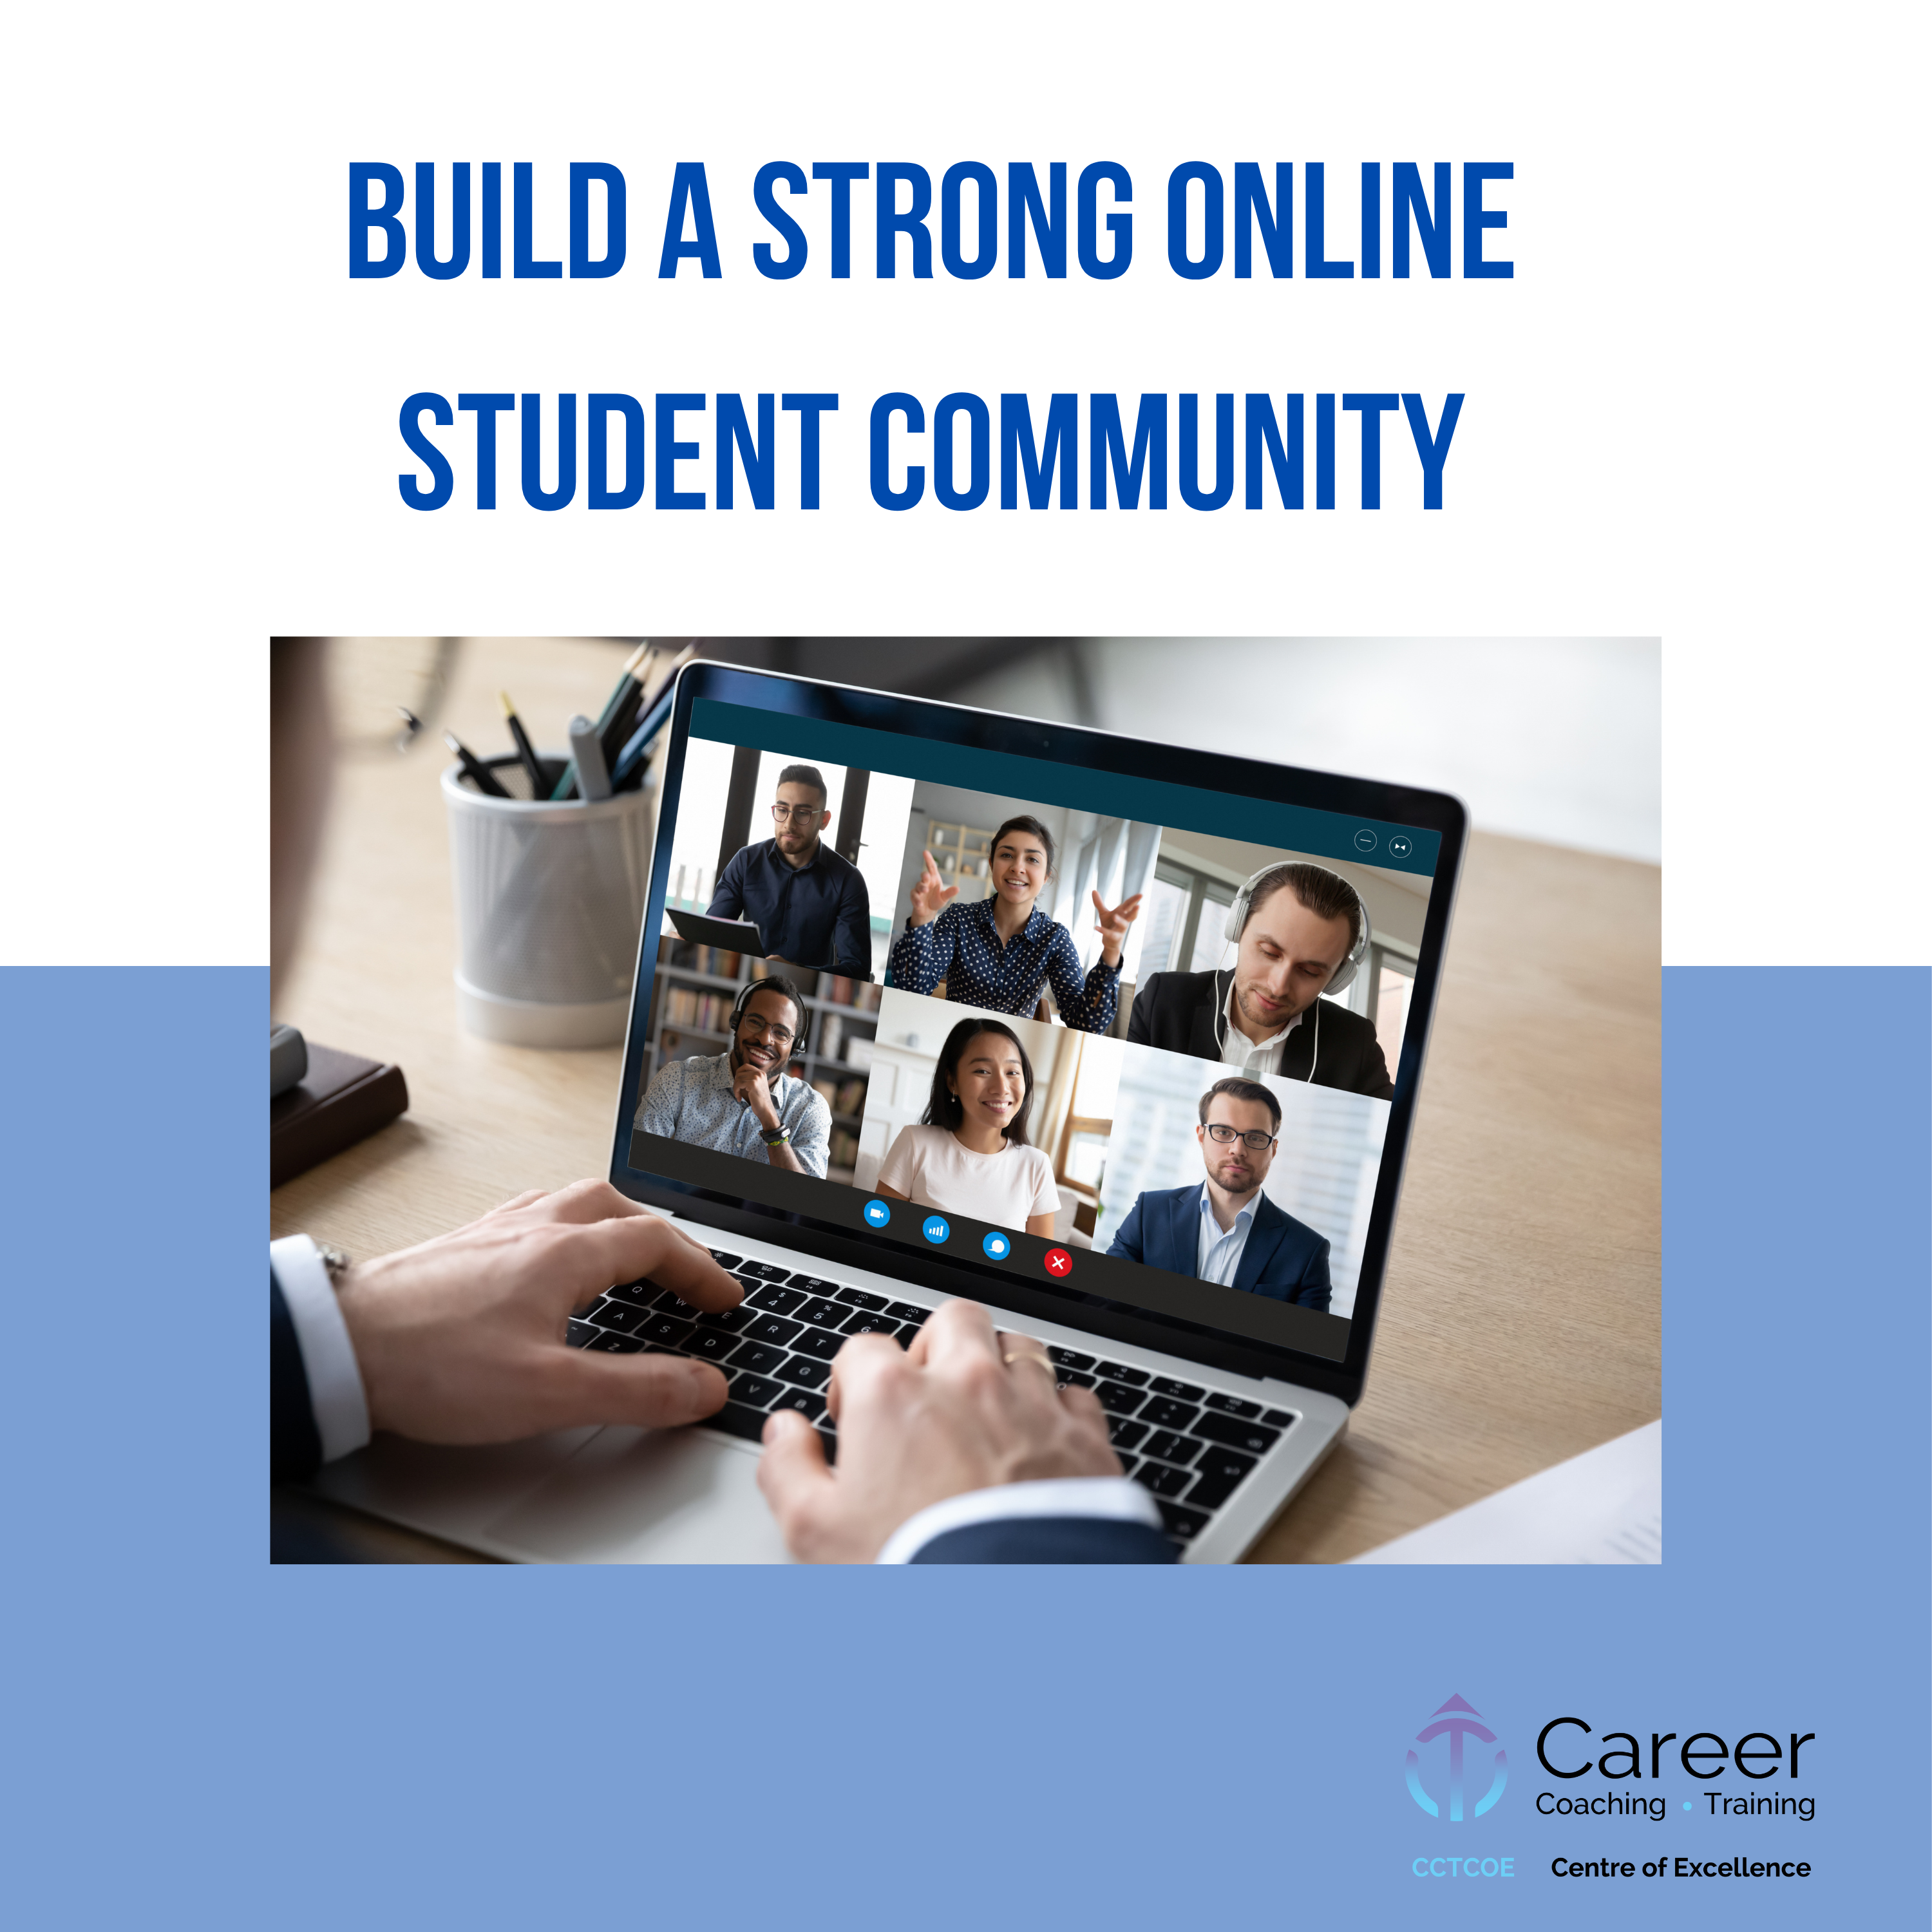 BUILD A STRONG ONLINE STUDENT COMMUNITY